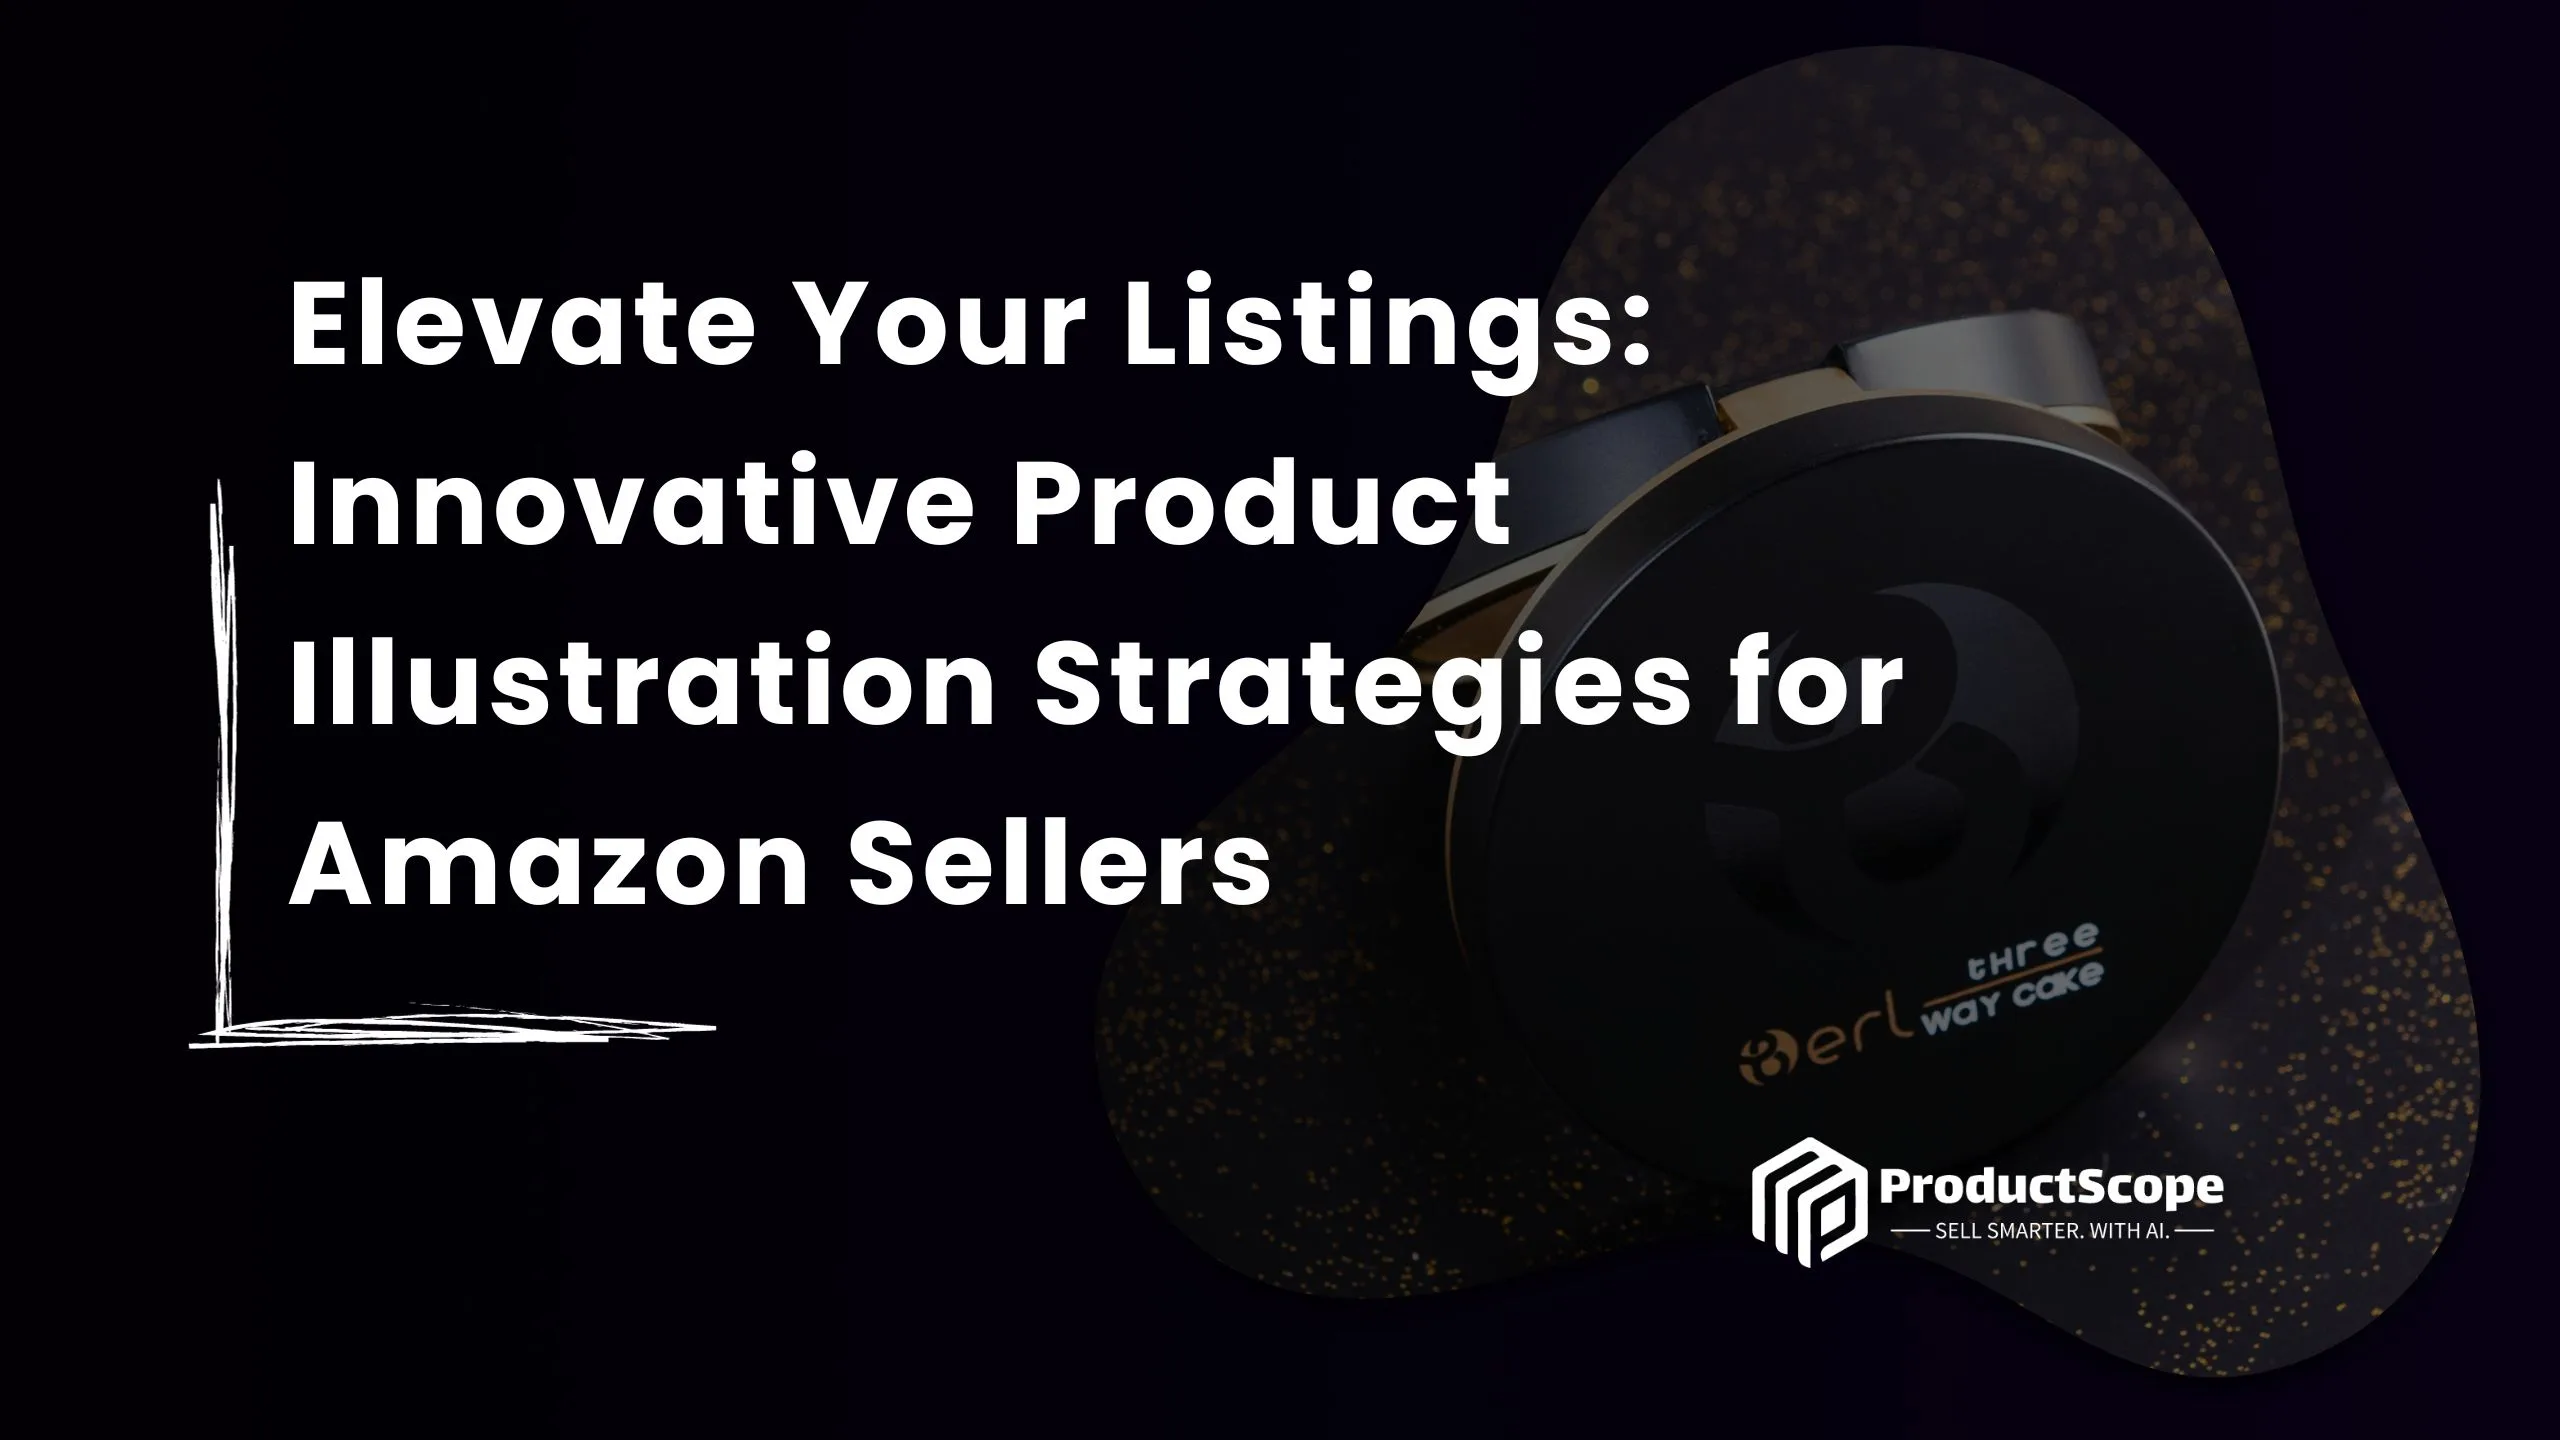 Elevate Your Listings: Innovative Product Illustration Strategies for Amazon Sellers